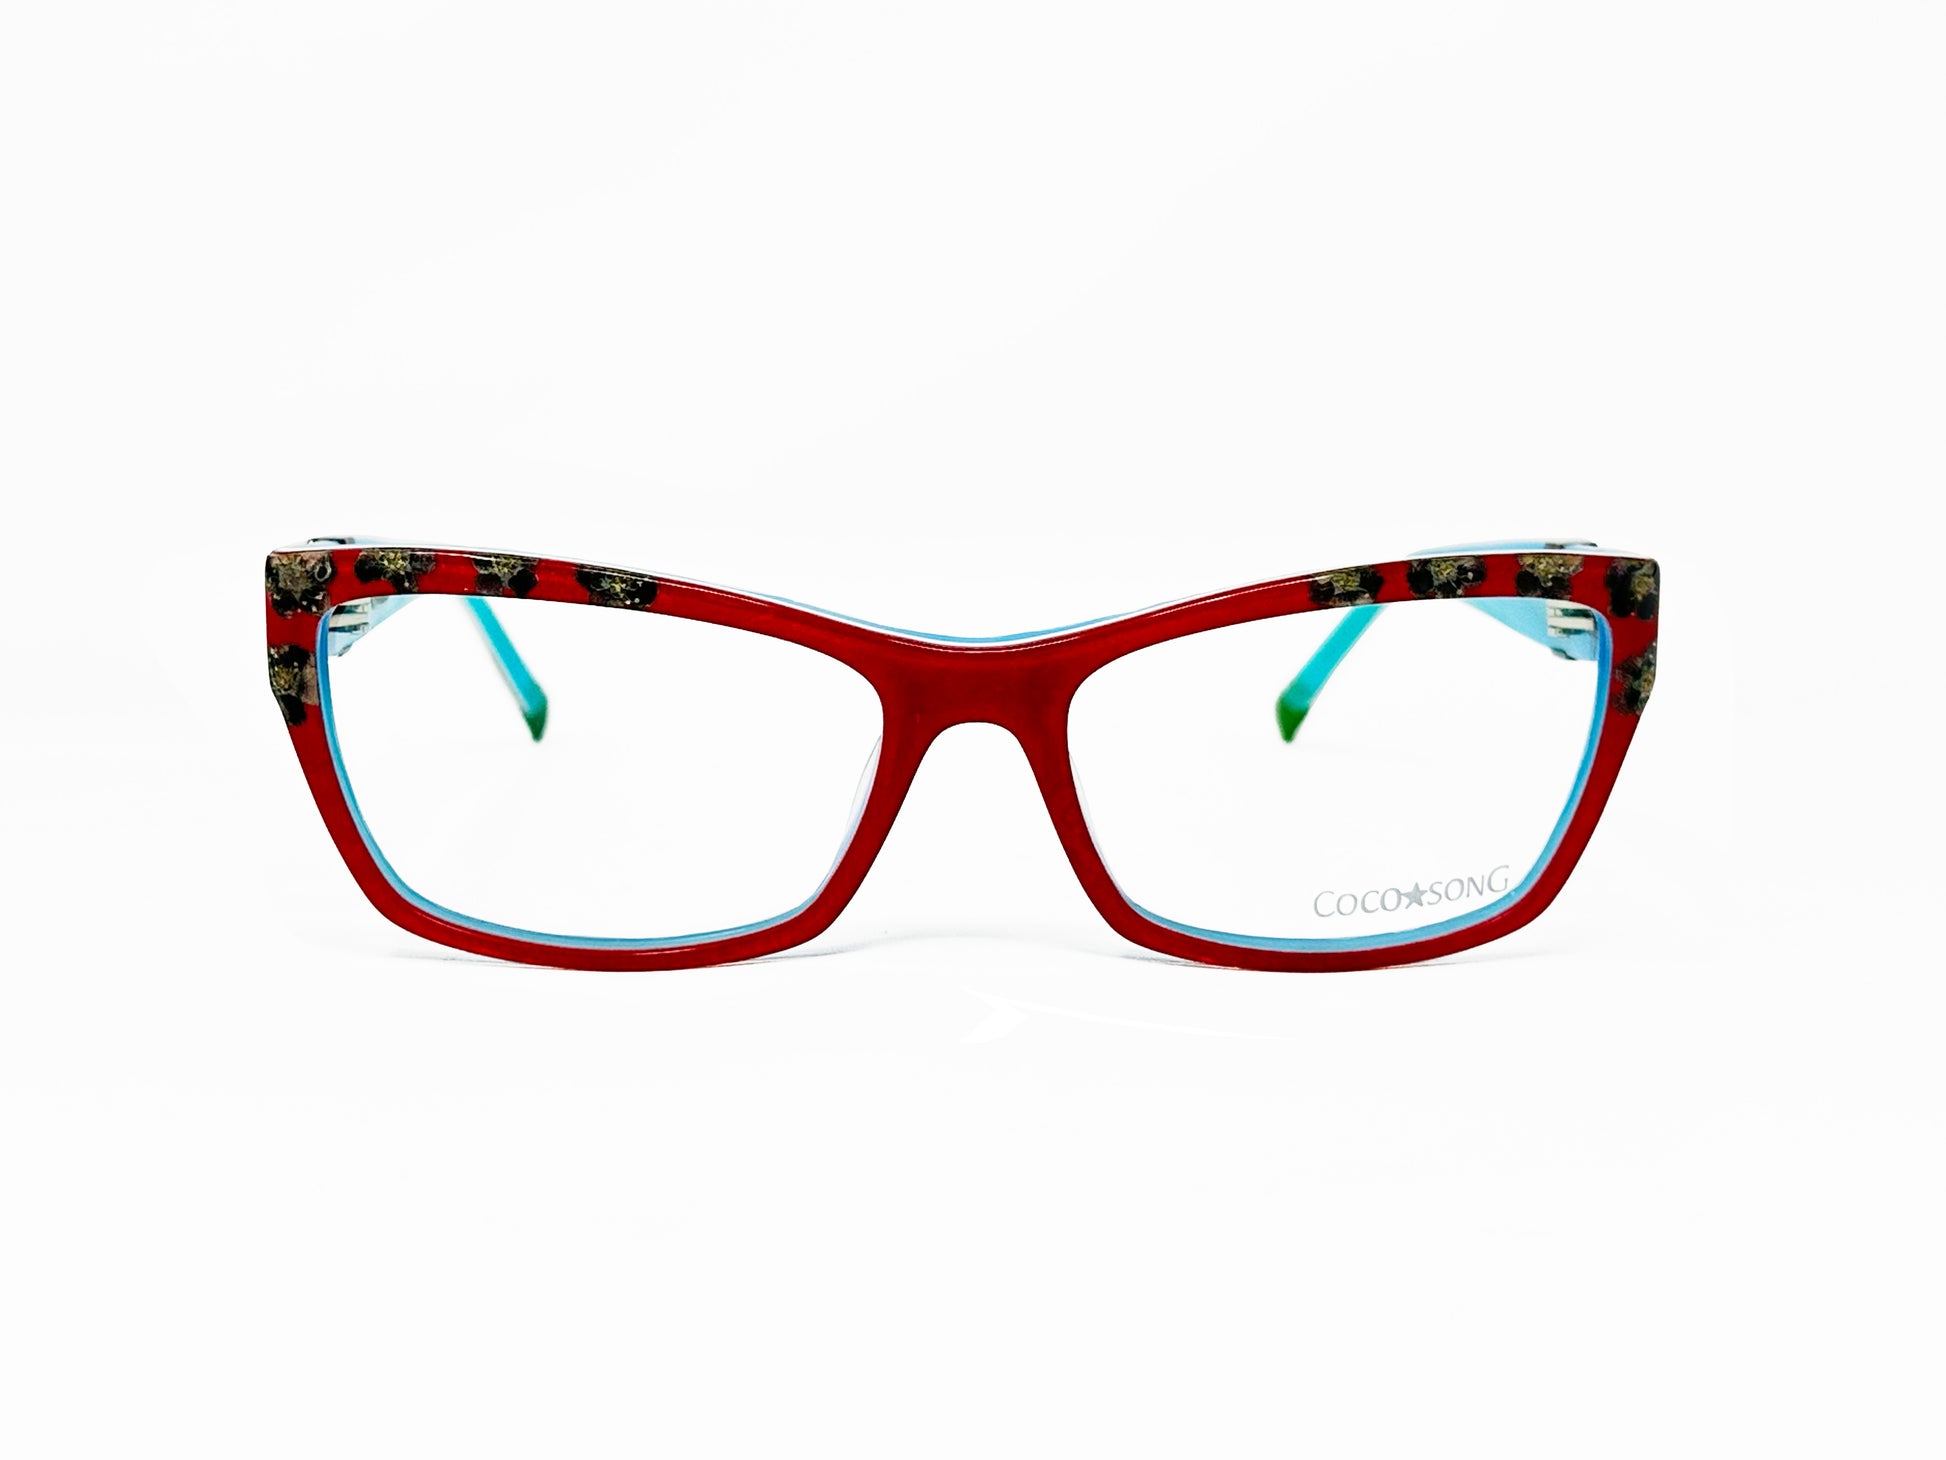 Coco Song upward-angled, rectangular, acetate optical frame. Model: For Last. Color: 4 - Red with gold/black flowers on corners and turquoise gem on temple. Front view. 